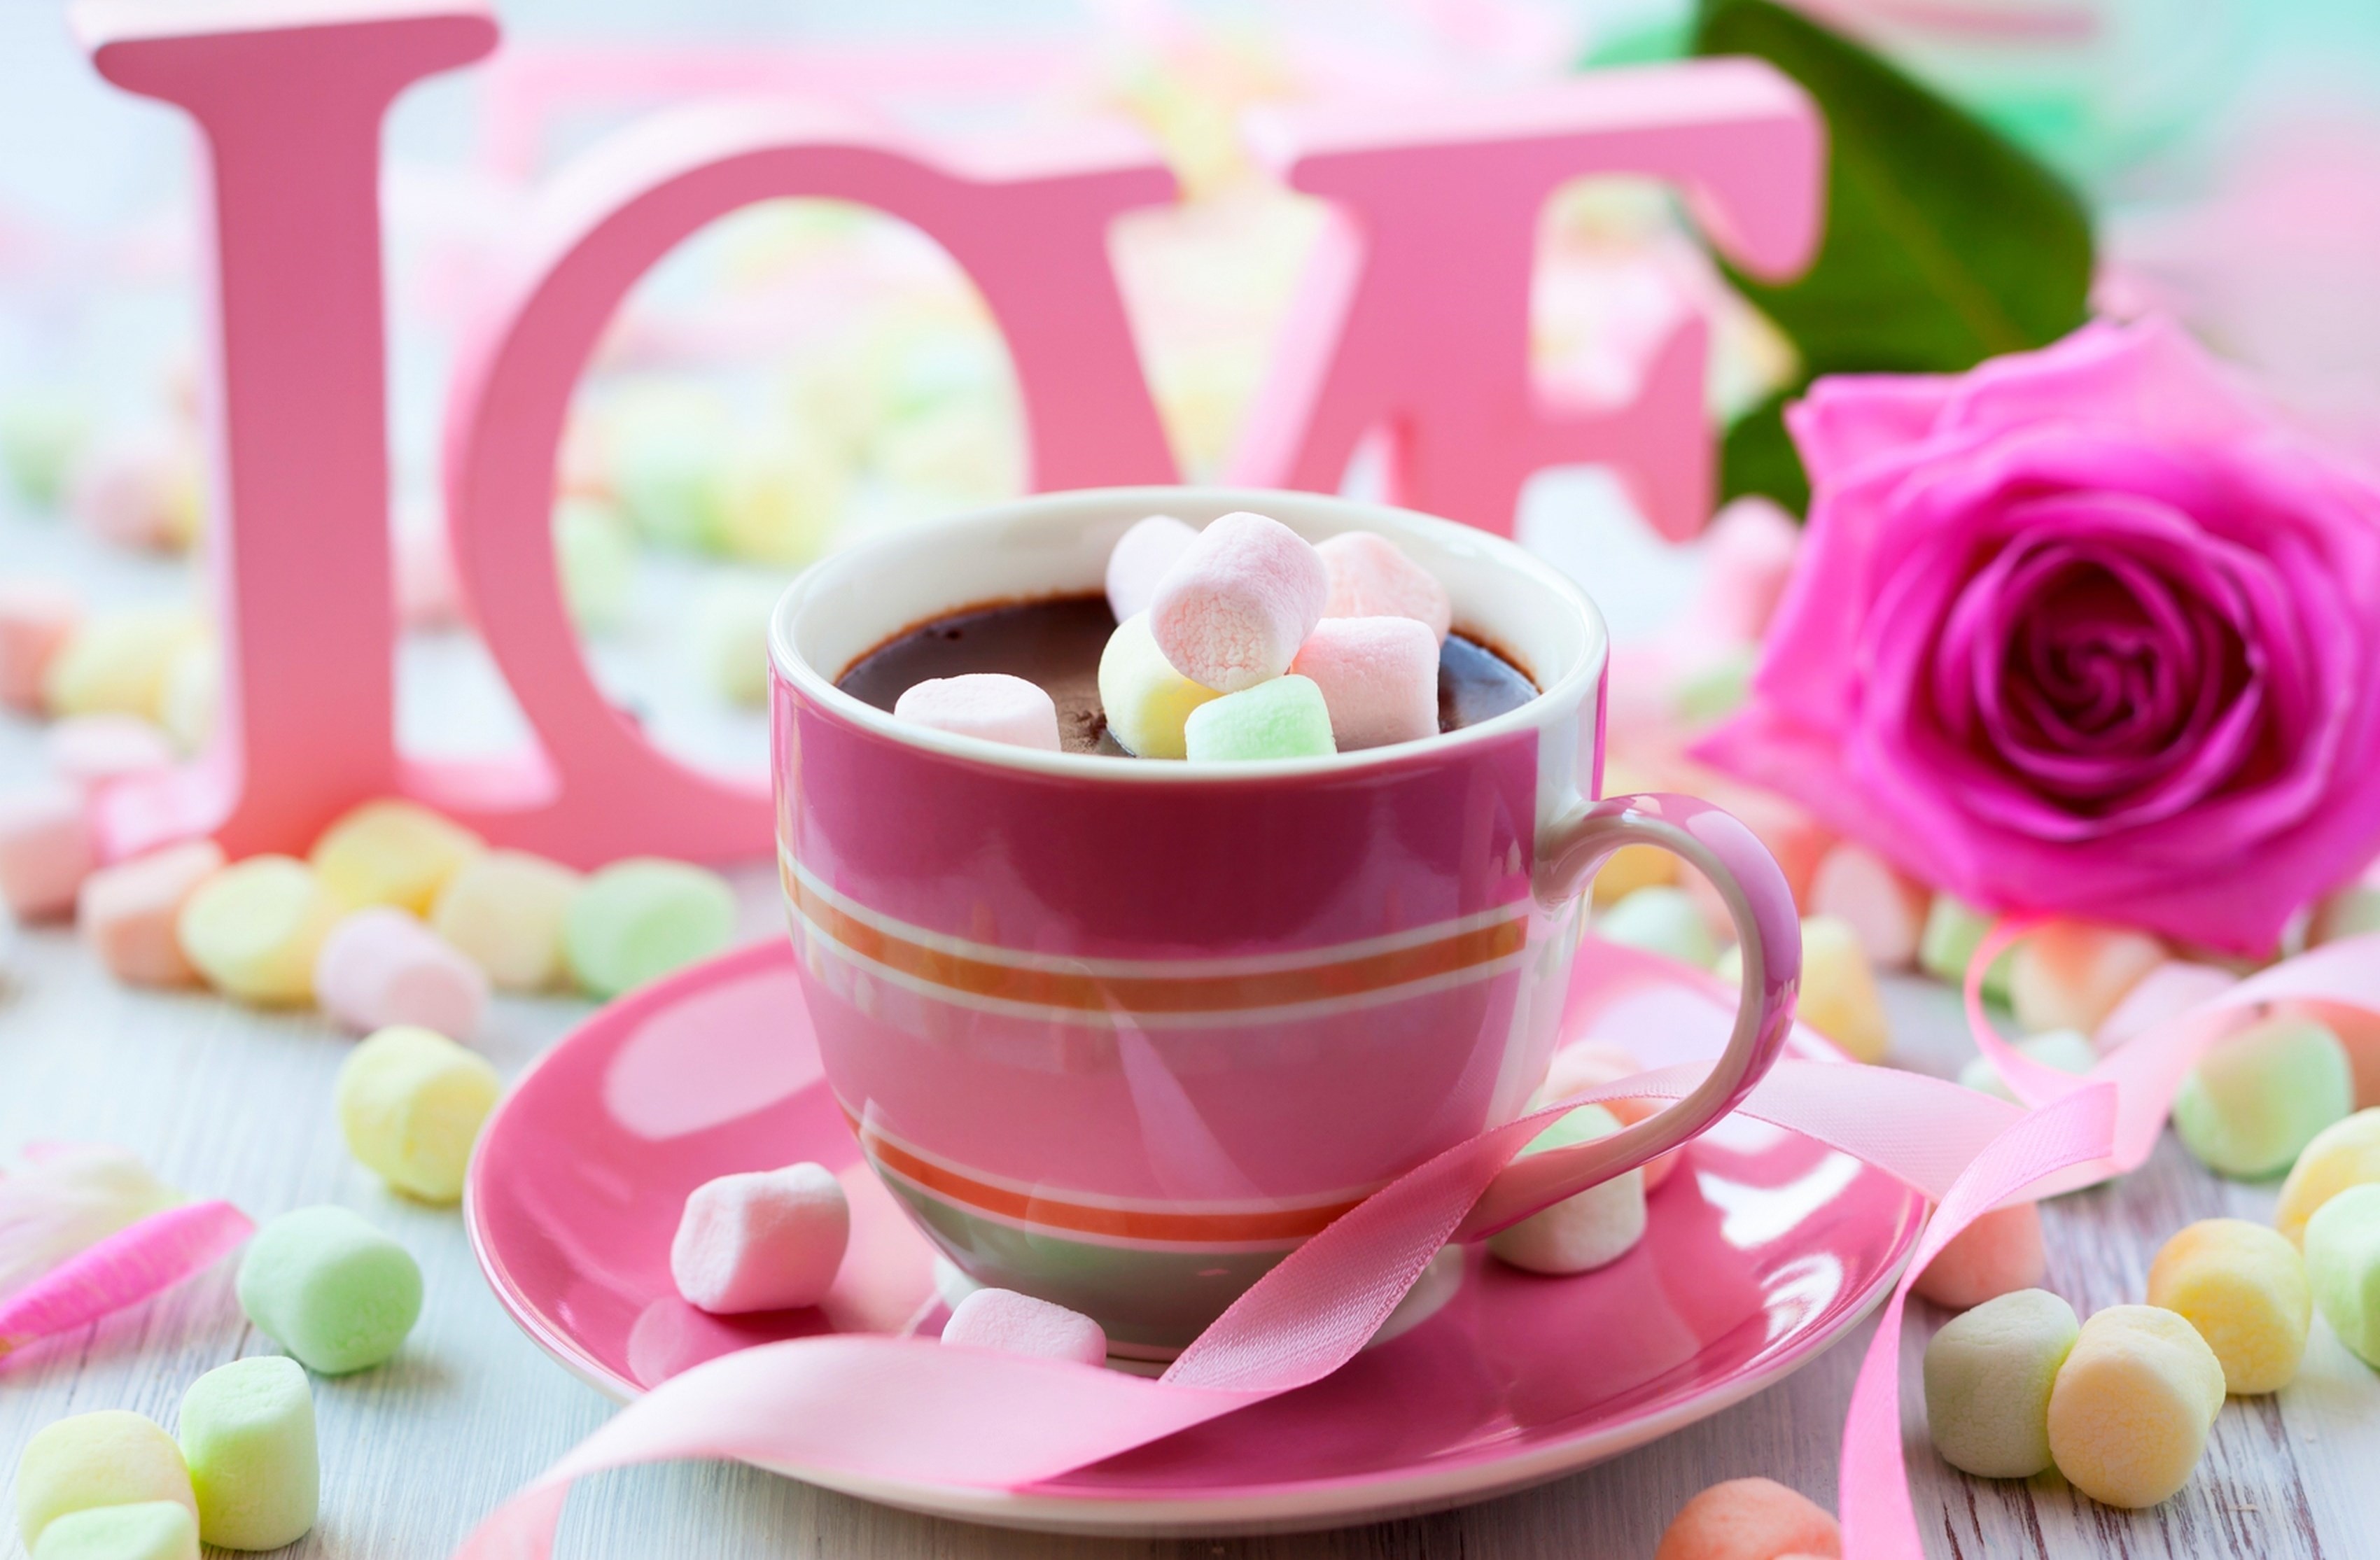 marshmallow, food, drink, chocolate, cup, romantic, rose